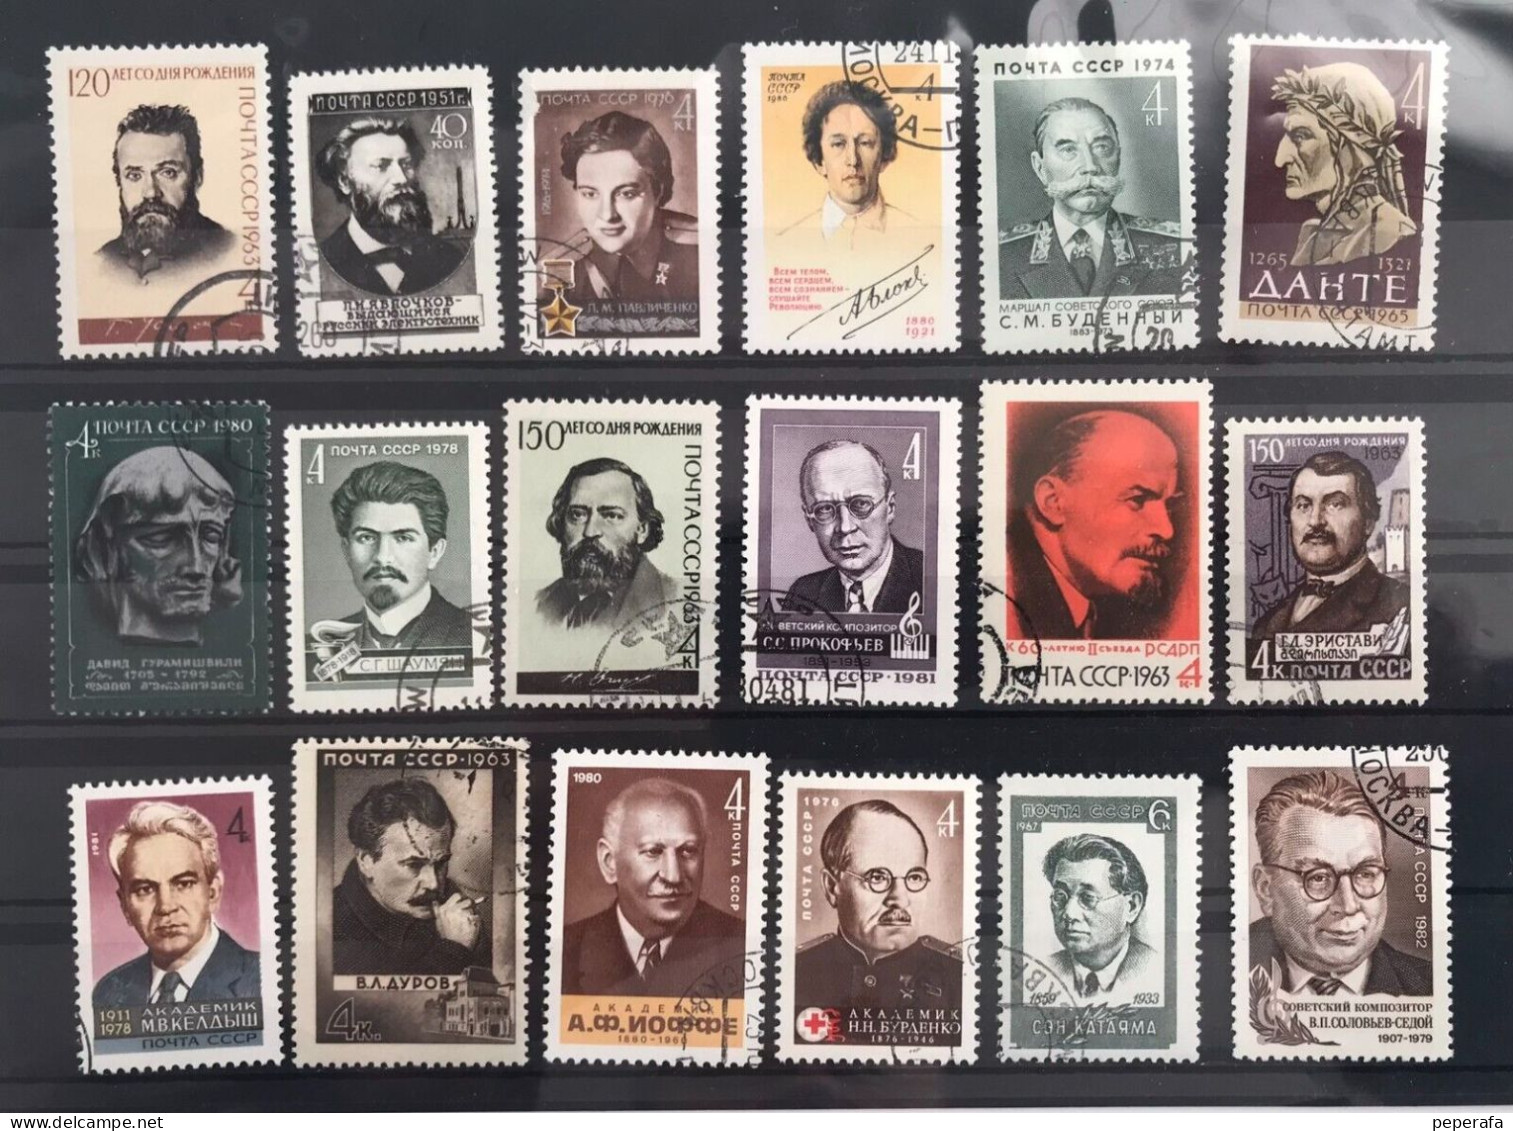 SOVIET UNION, NOYTA CCCP, COLLECTION, FAMOUS PEOPLE, LOT 4 - Collections